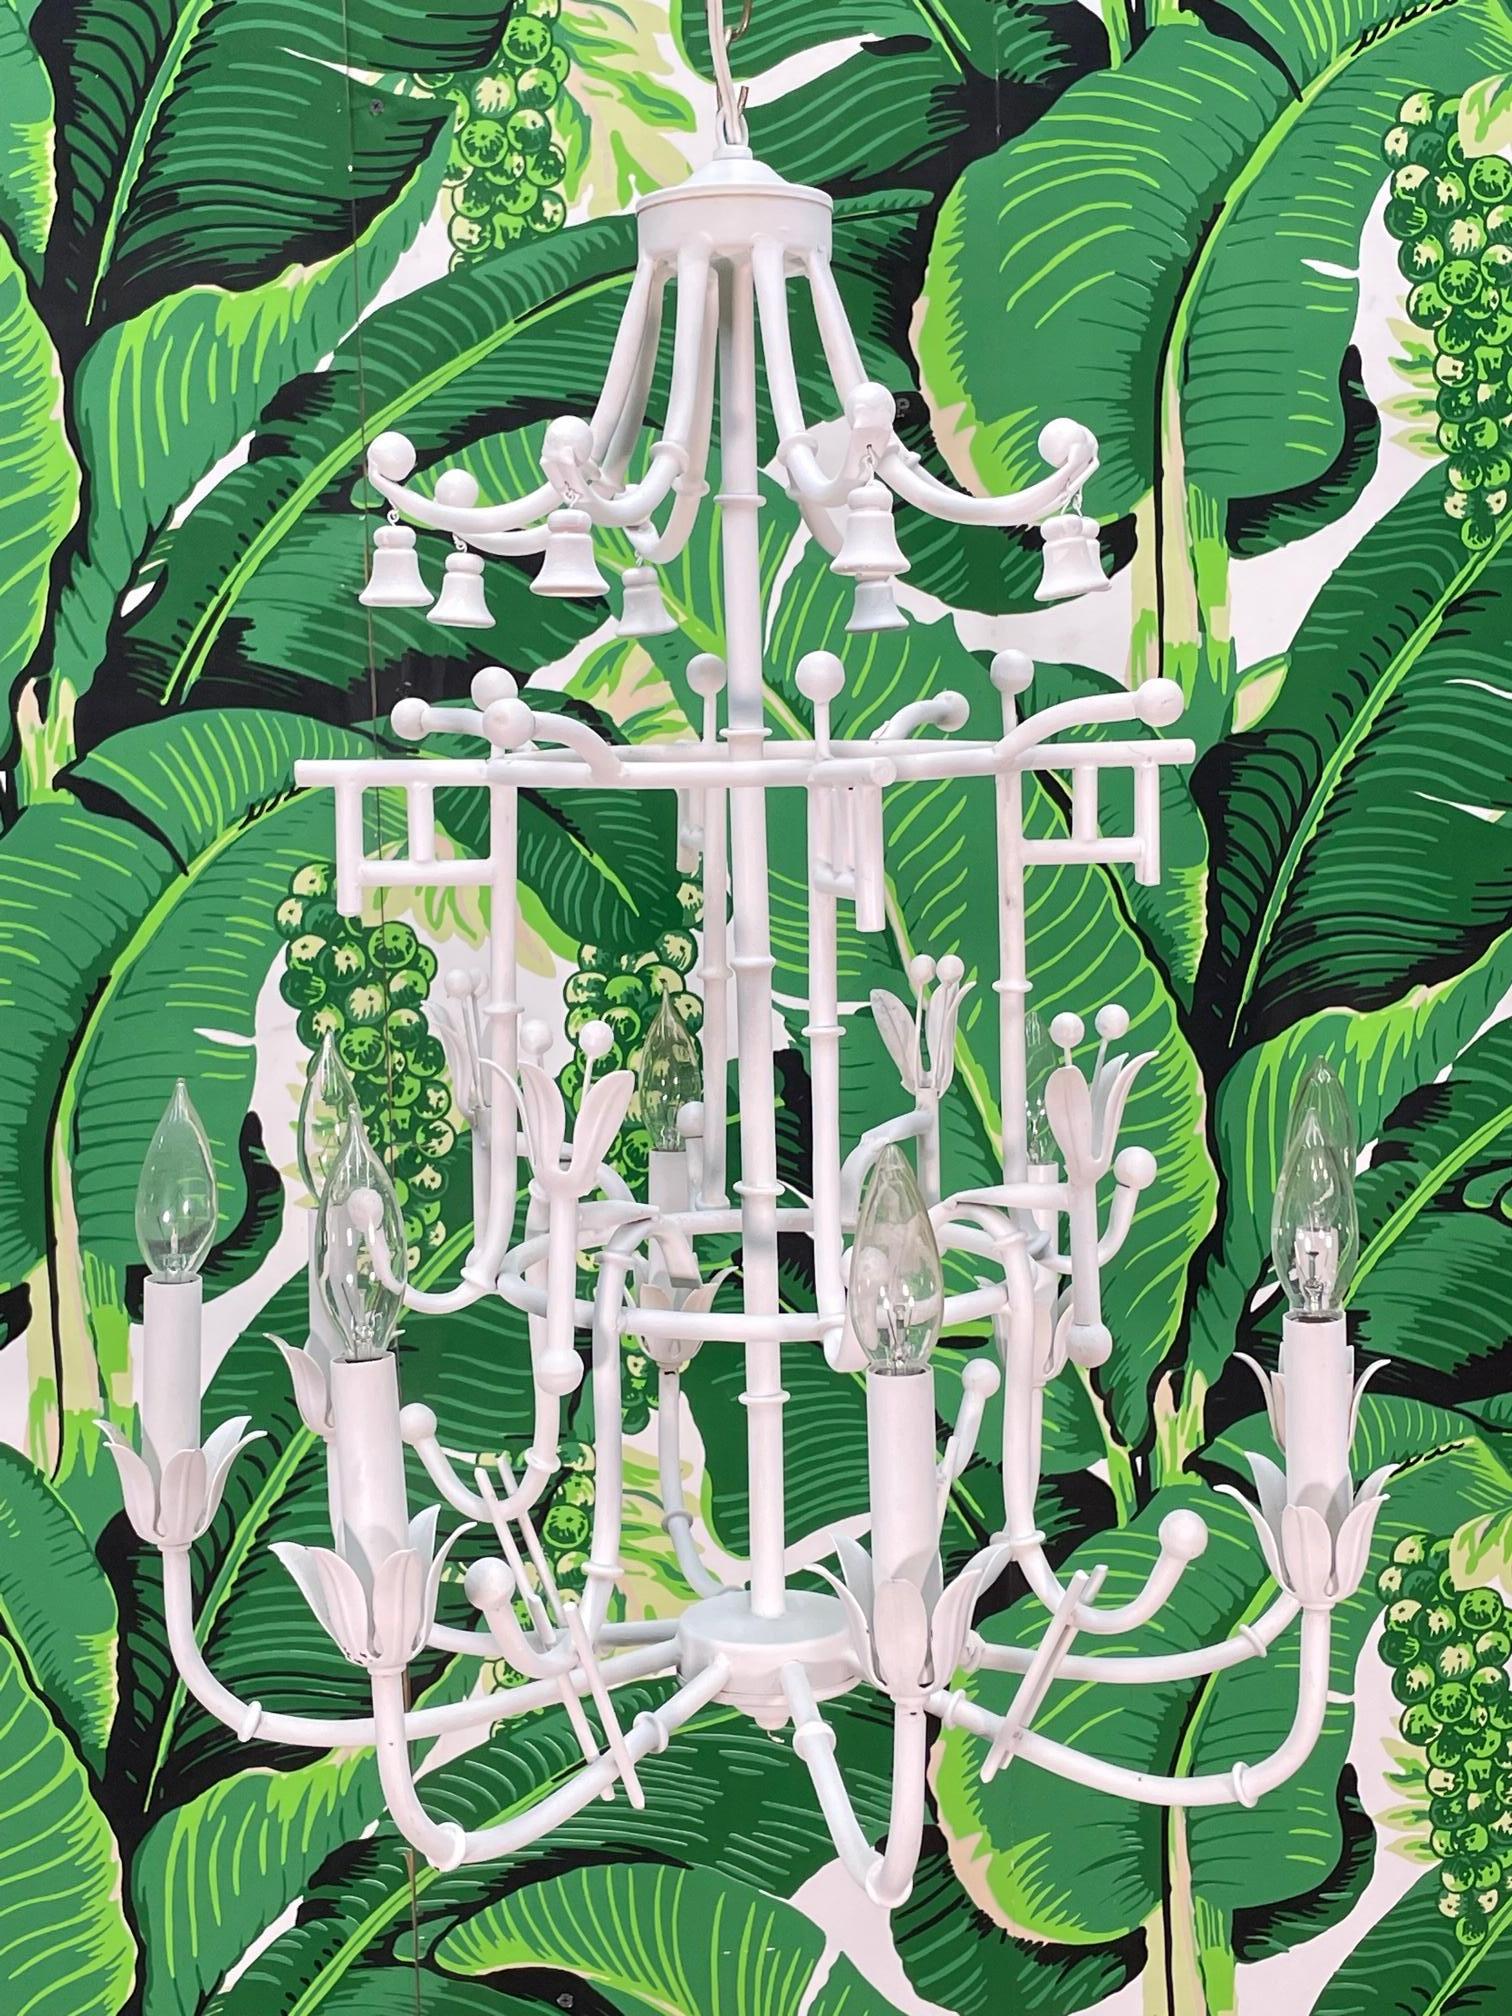 Vintage metal pagoda chandelier features a metal faux bamboo frame with wood-carved bells. Good condition with minor imperfections consistent with age, see photos for condition details.

